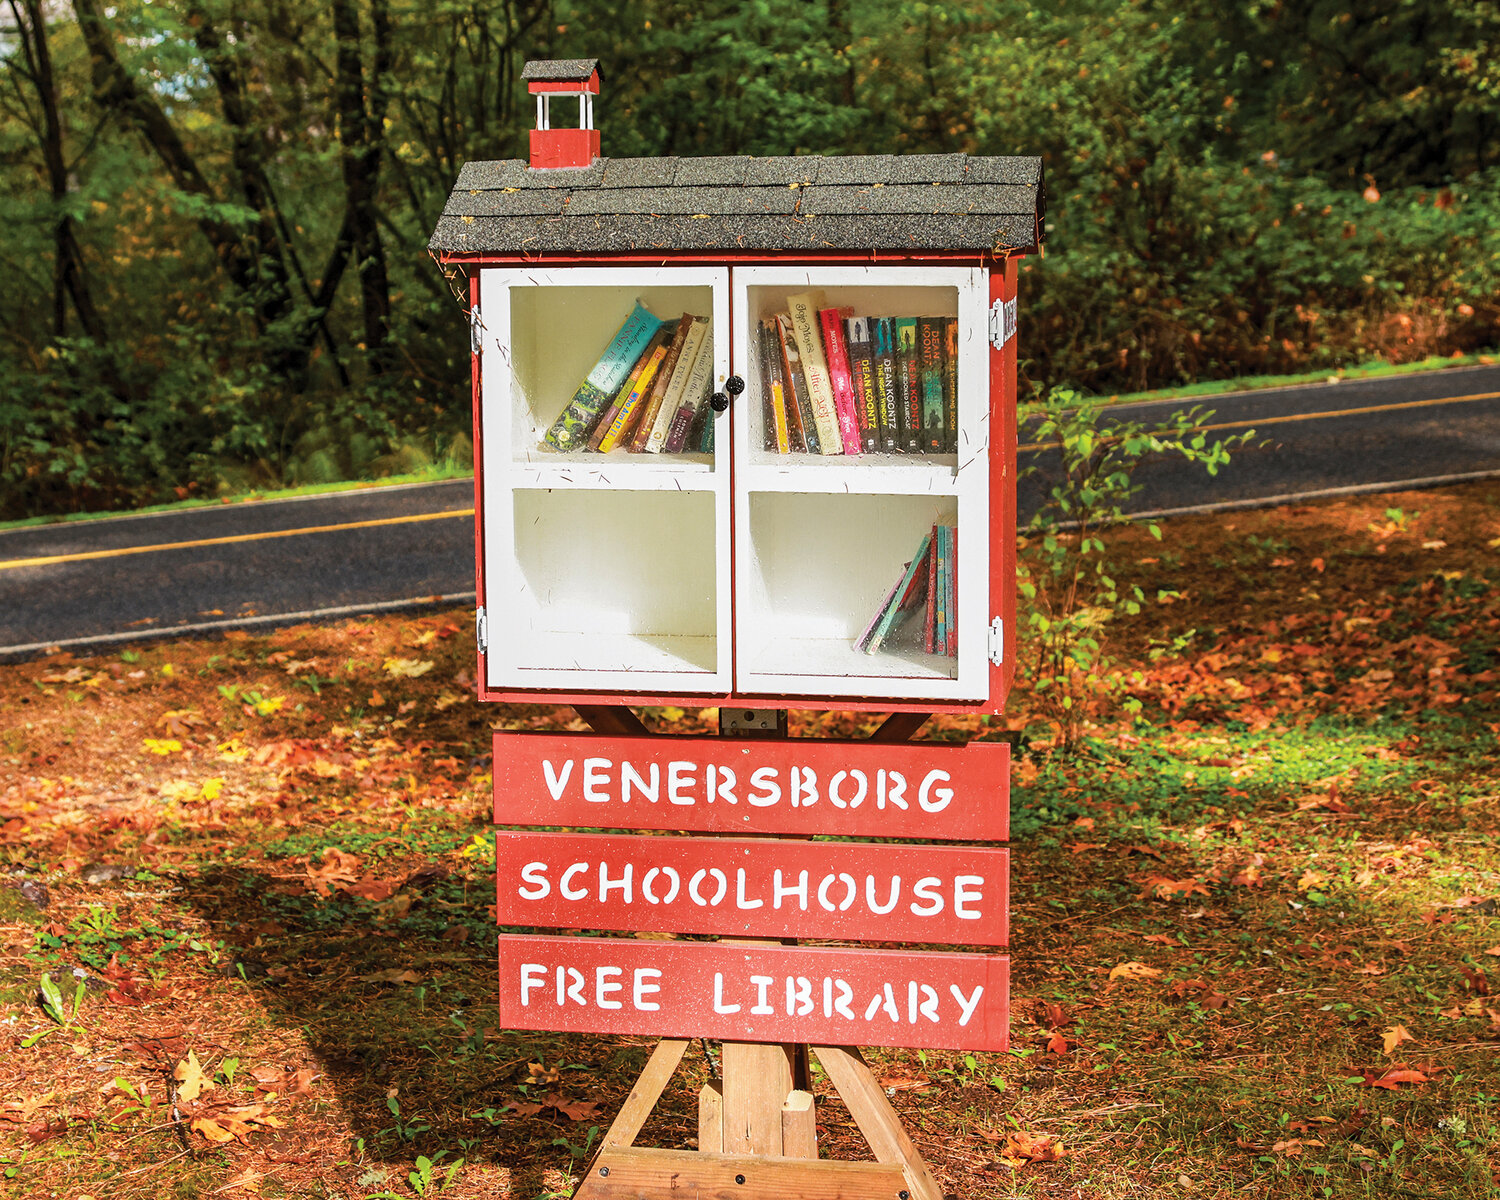 Dave Tripp, a society member, built this mini library to resemble the schoolhouse. The mini library is on the schoolhouse grounds located at 24309 NE 209th St. near Battle Ground.